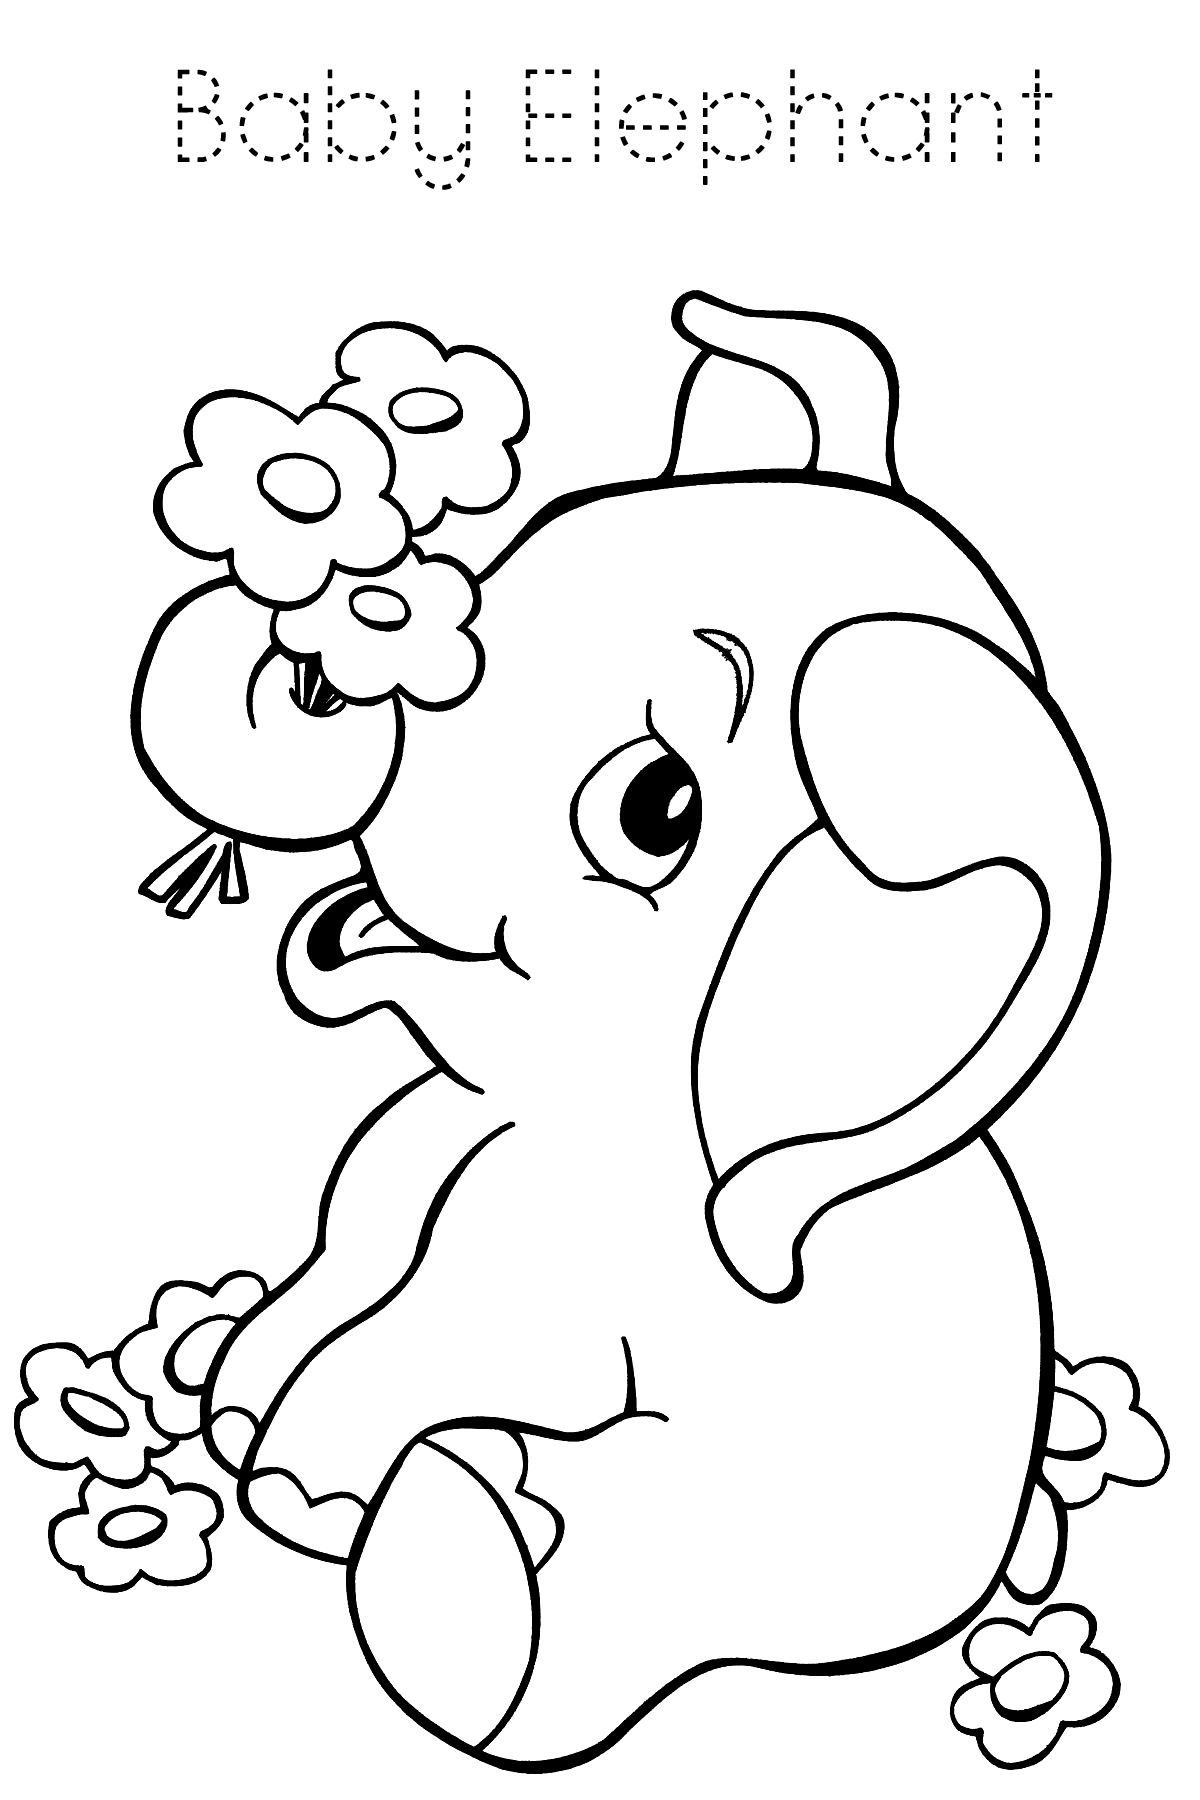 Baby Elephant Coloring Page Tracable